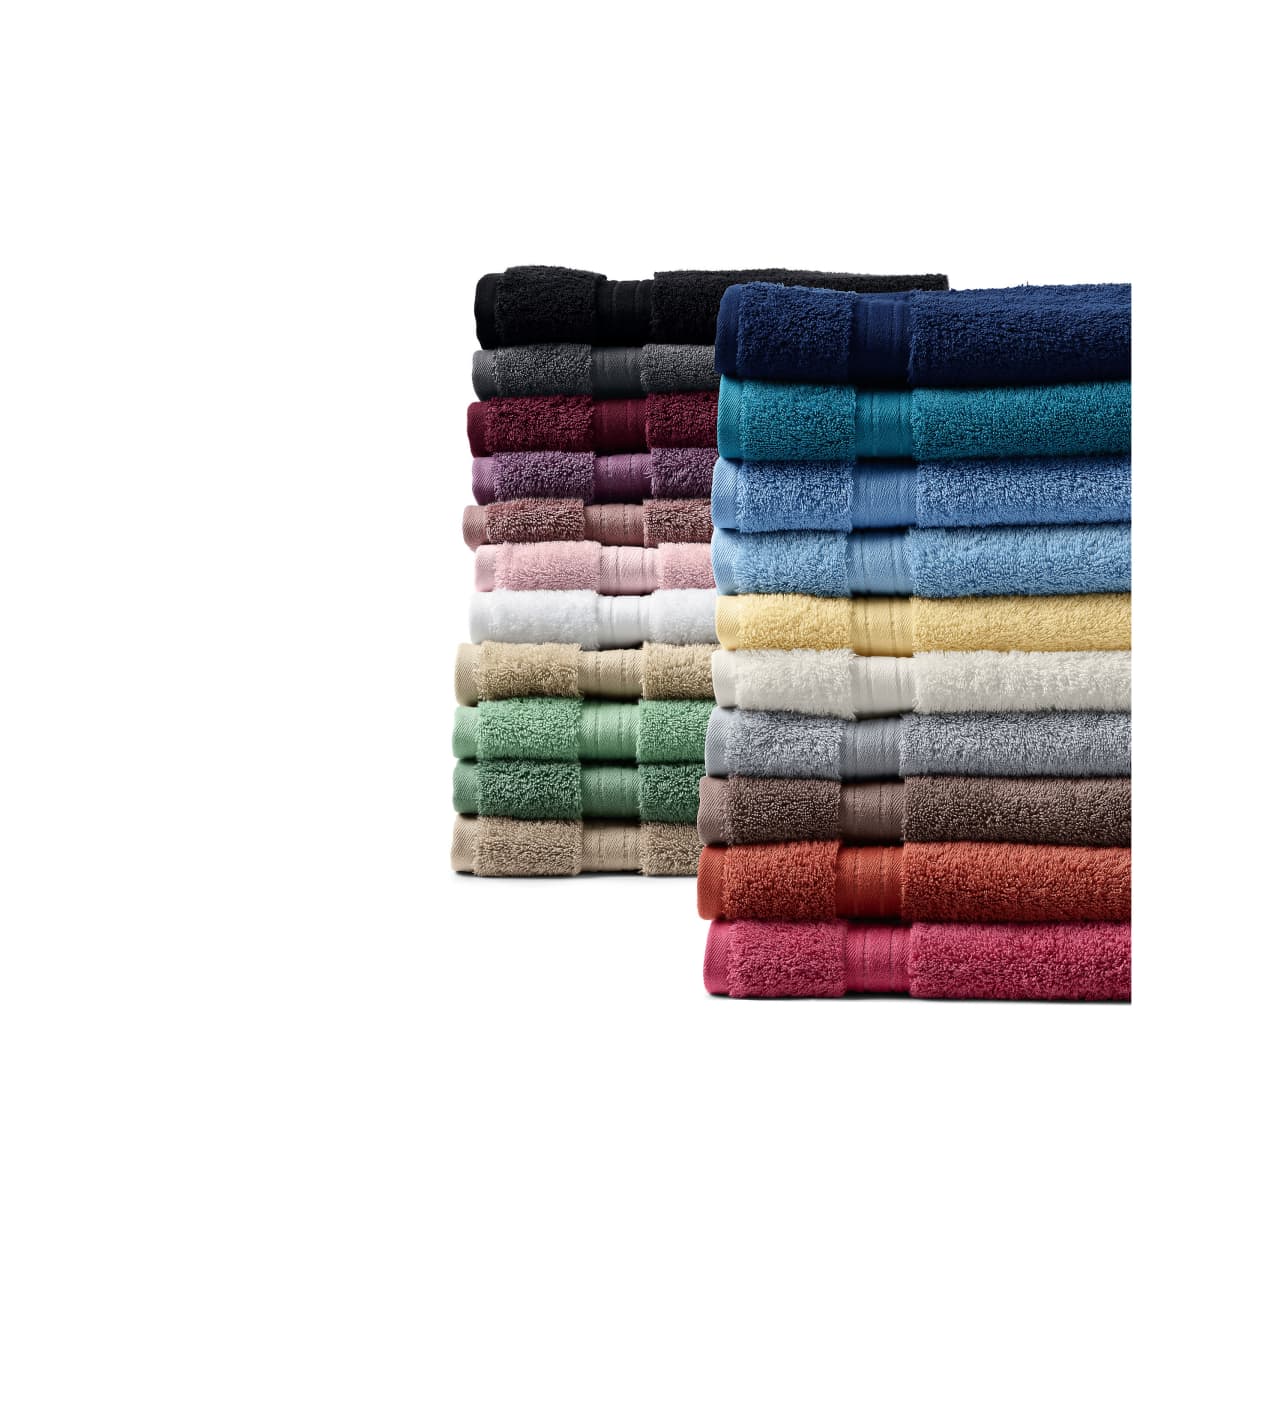 The 5 Best Bath Towels that Feel Soft and Look Stylish - Buy Side from WSJ